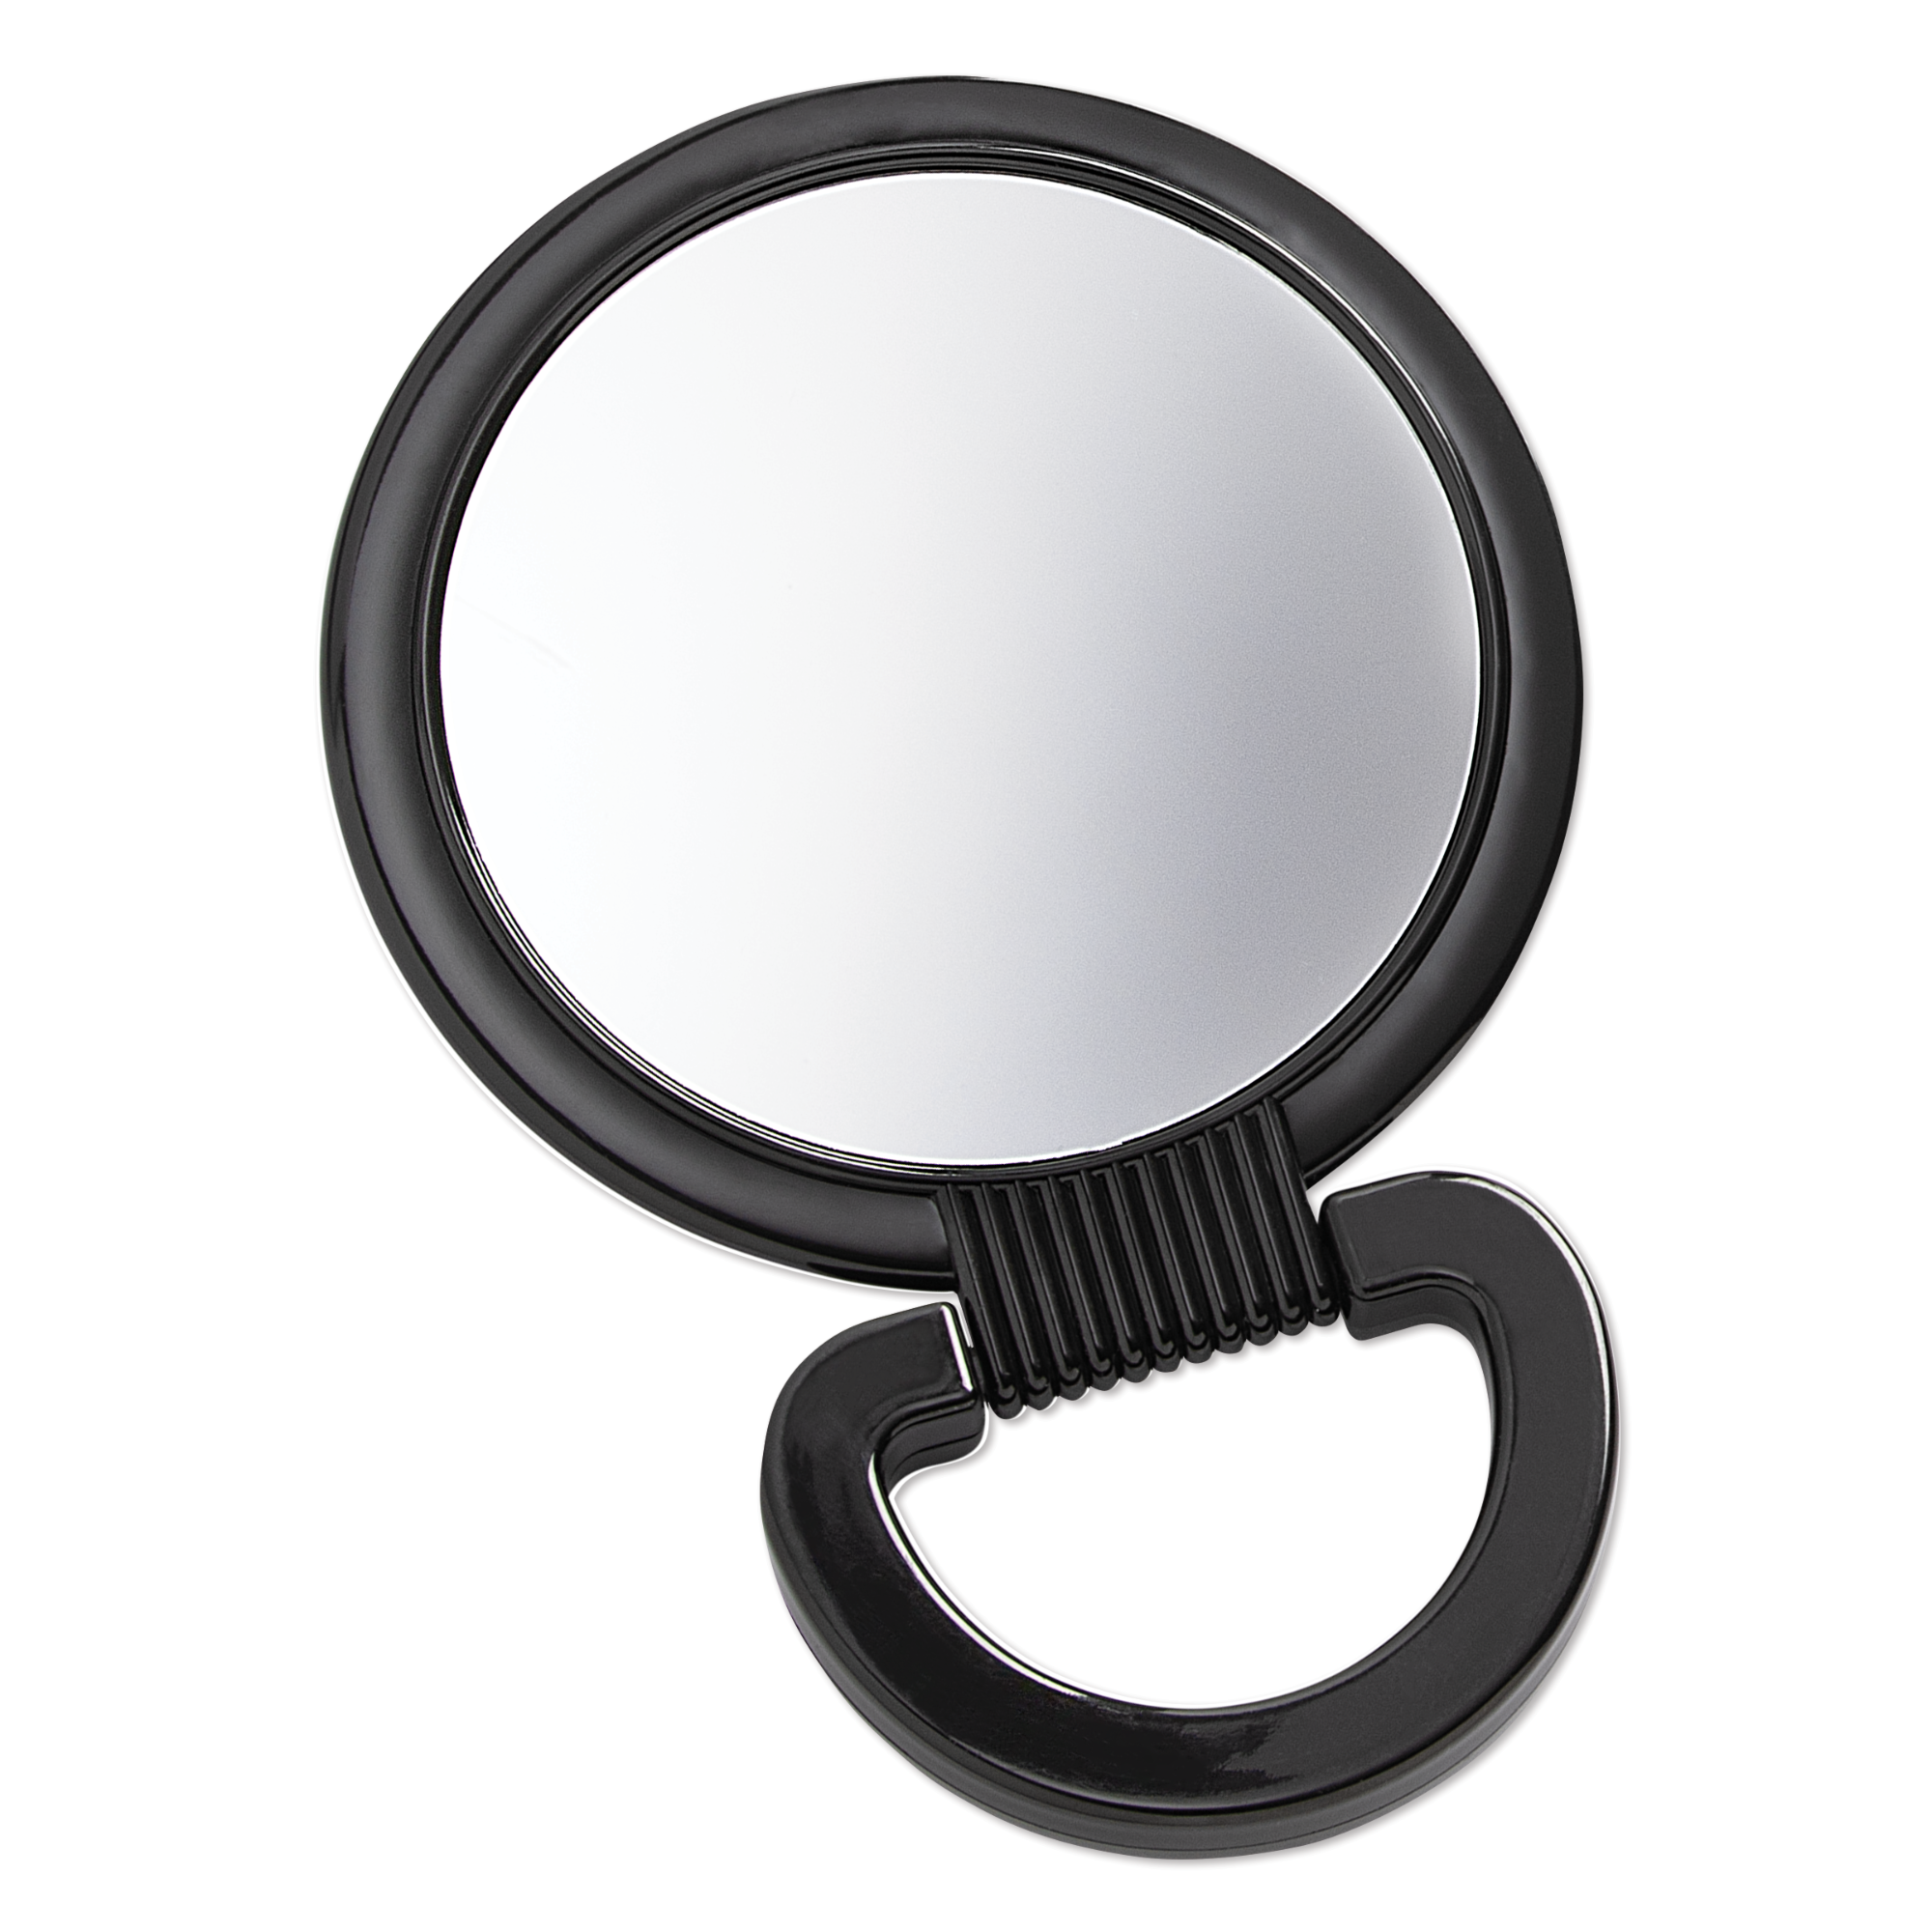 2-Sided Mirror with Handle/Stand